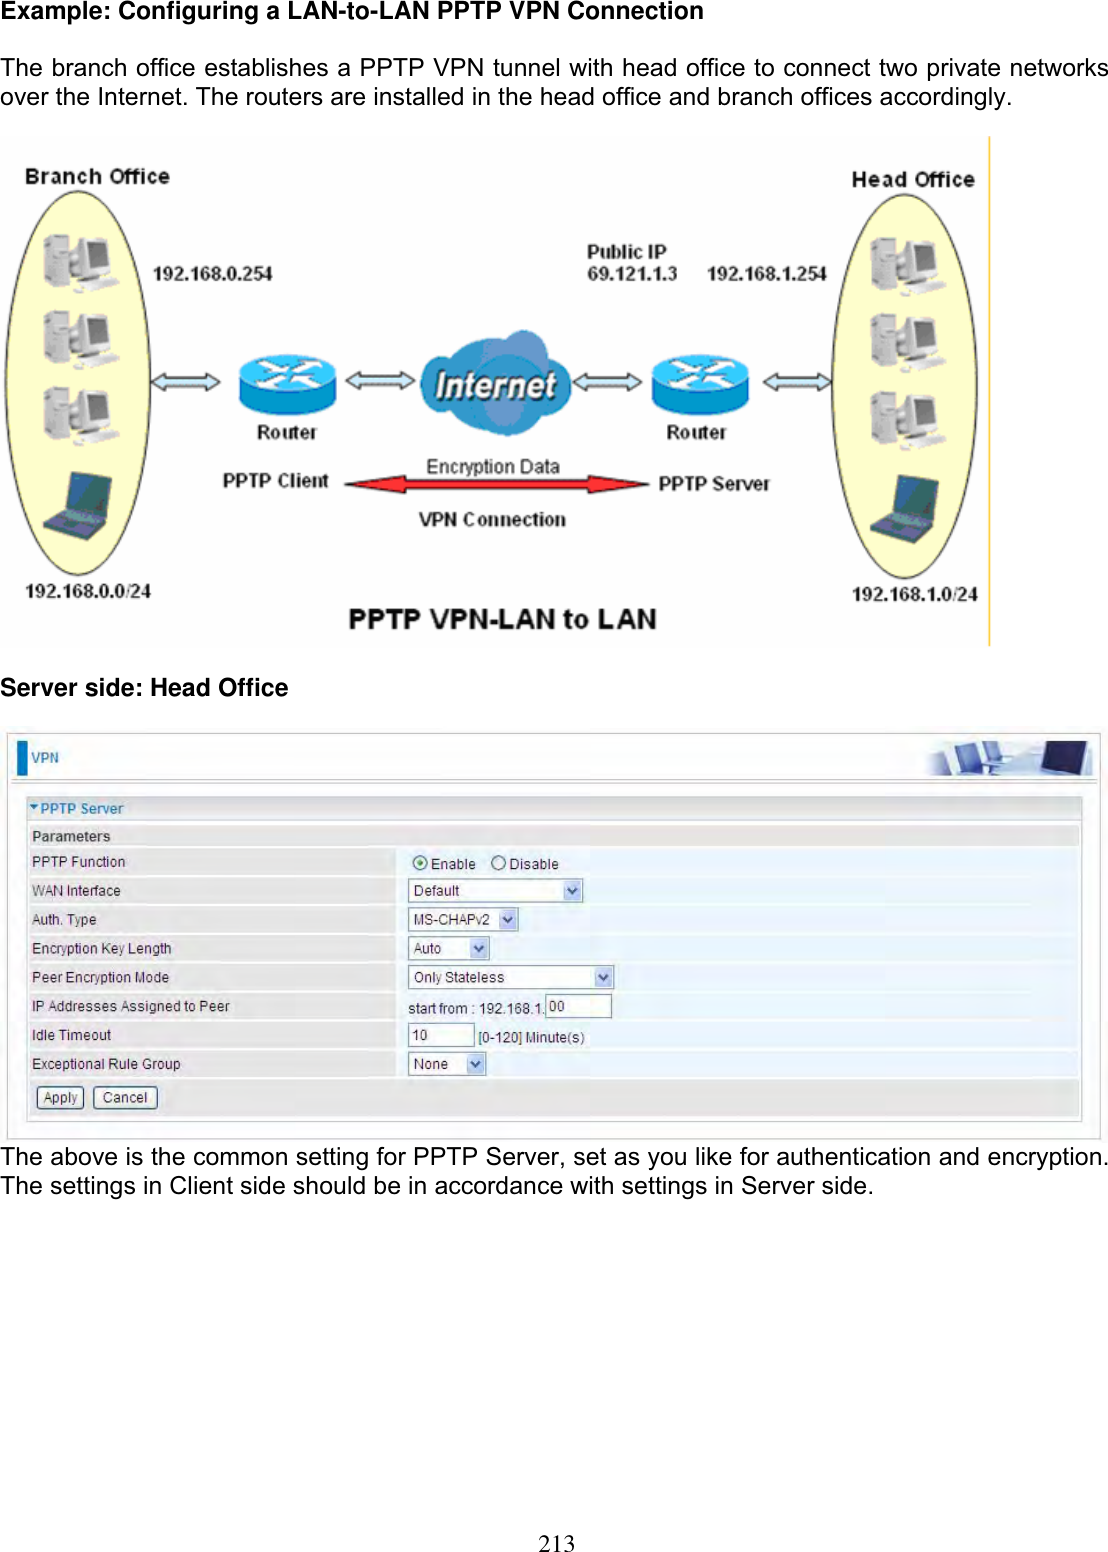 213Example: Configuring a LAN-to-LAN PPTP VPN Connection The branch office establishes a PPTP VPN tunnel with head office to connect two private networks over the Internet. The routers are installed in the head office and branch offices accordingly. Server side: Head Office The above is the common setting for PPTP Server, set as you like for authentication and encryption. The settings in Client side should be in accordance with settings in Server side. 